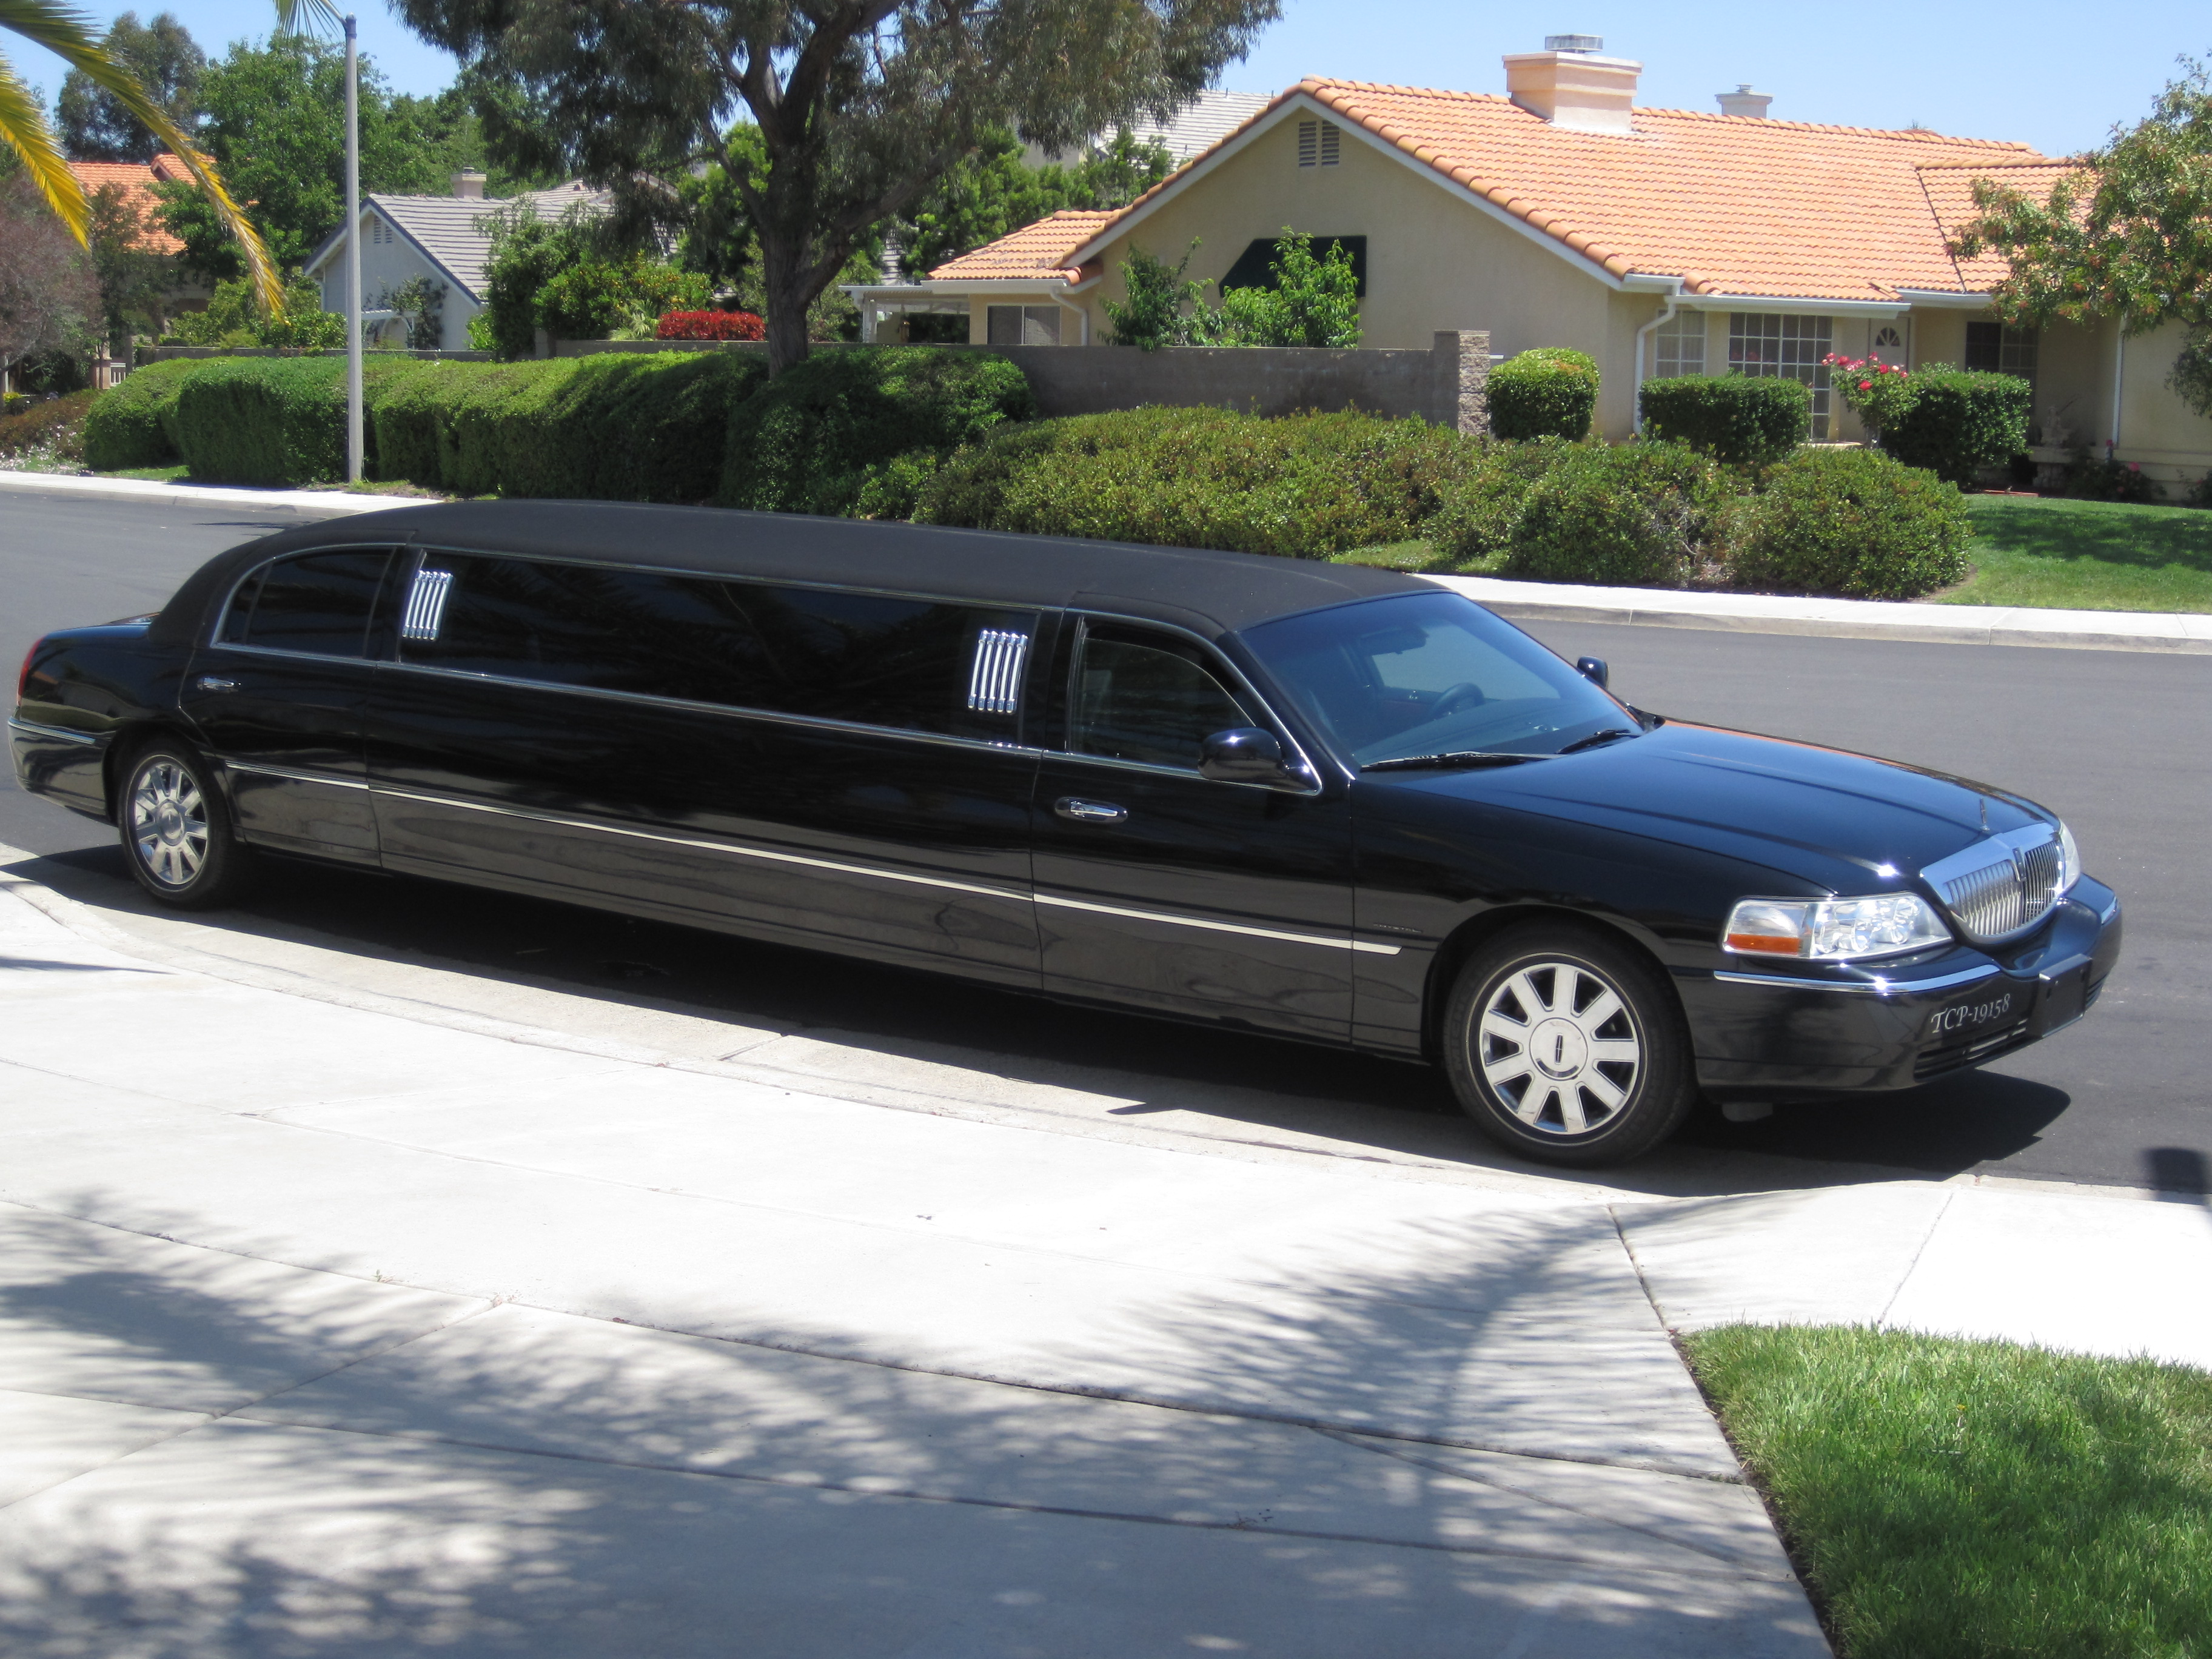 Krystal Coach Limos, which are now upgraded by the Limo Elite-the ultimate Limo.